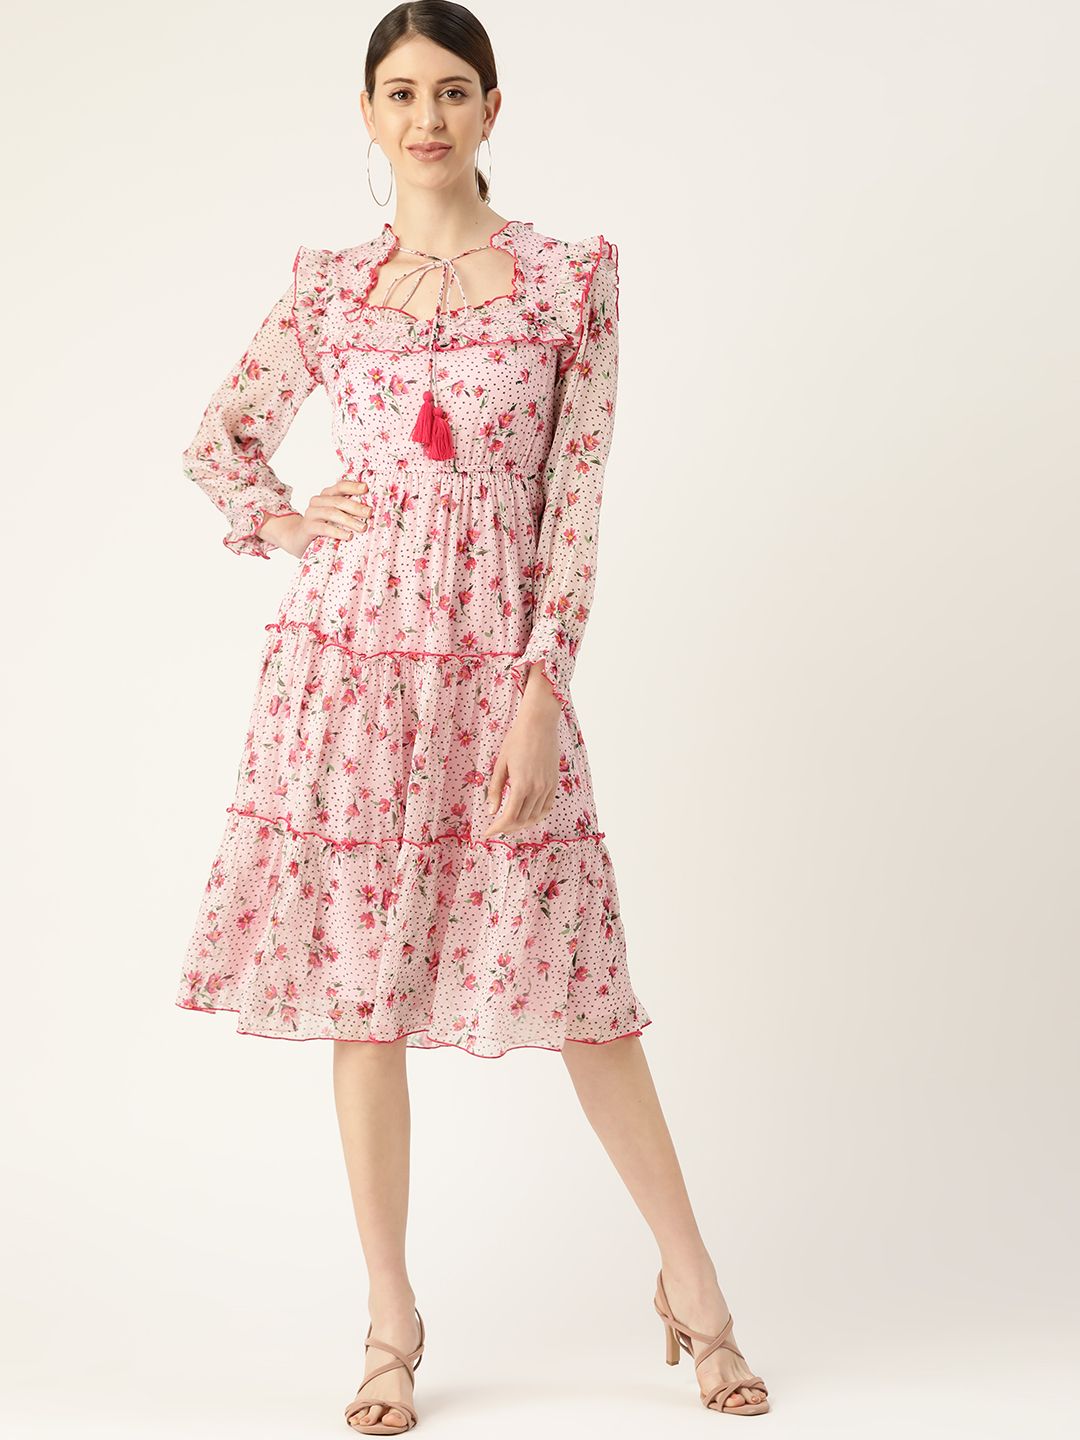 Antheaa Pink Floral Print Tiered A-Line Dress Price in India